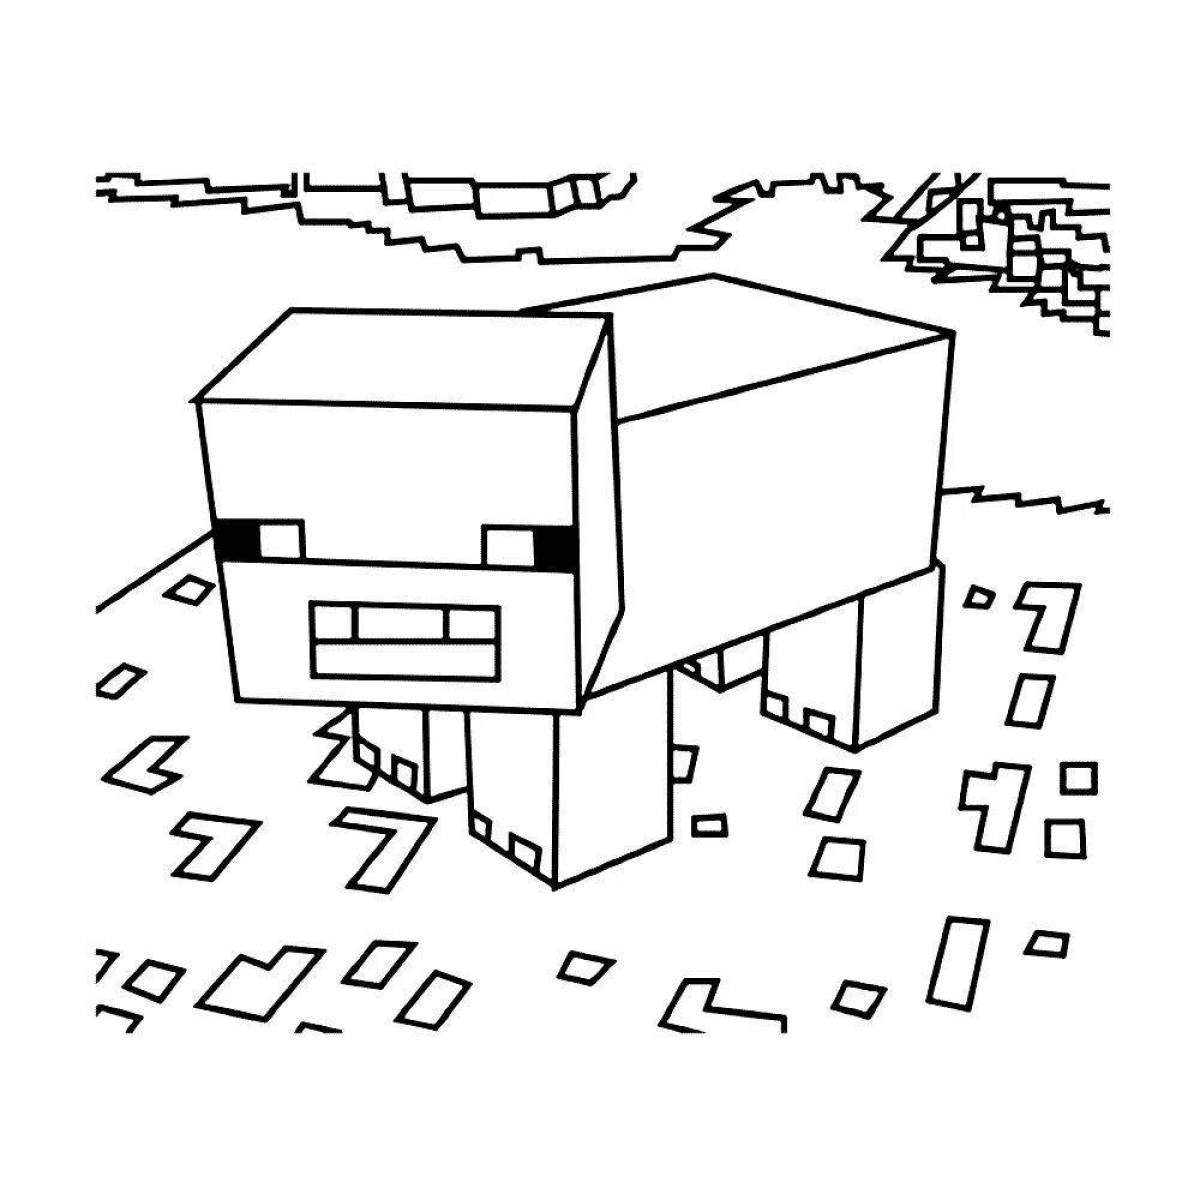 Flawless minecraft ender dragon coloring page